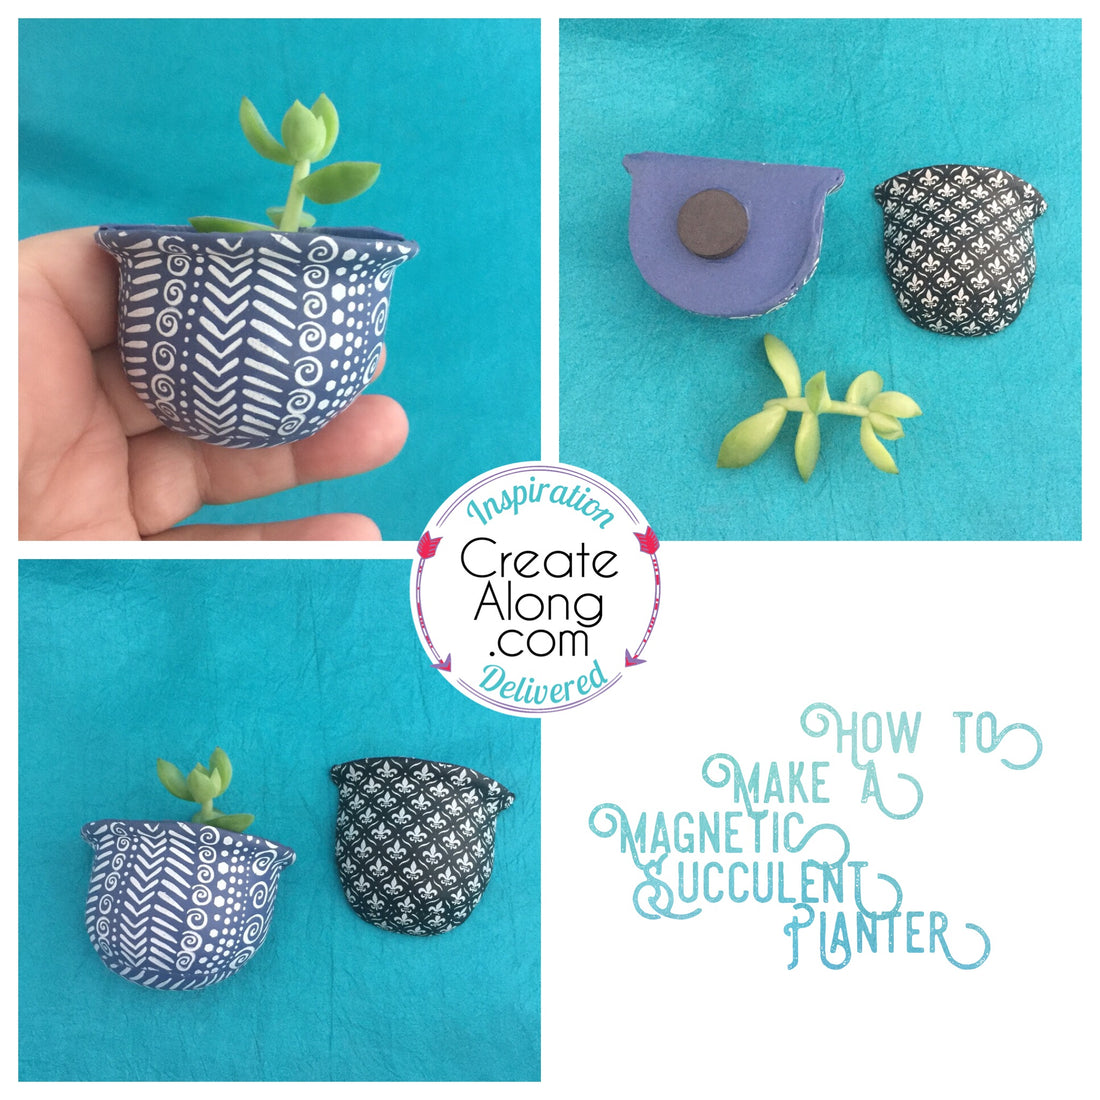 How to make a Magnetic Succulent Planter with Polymer Clay